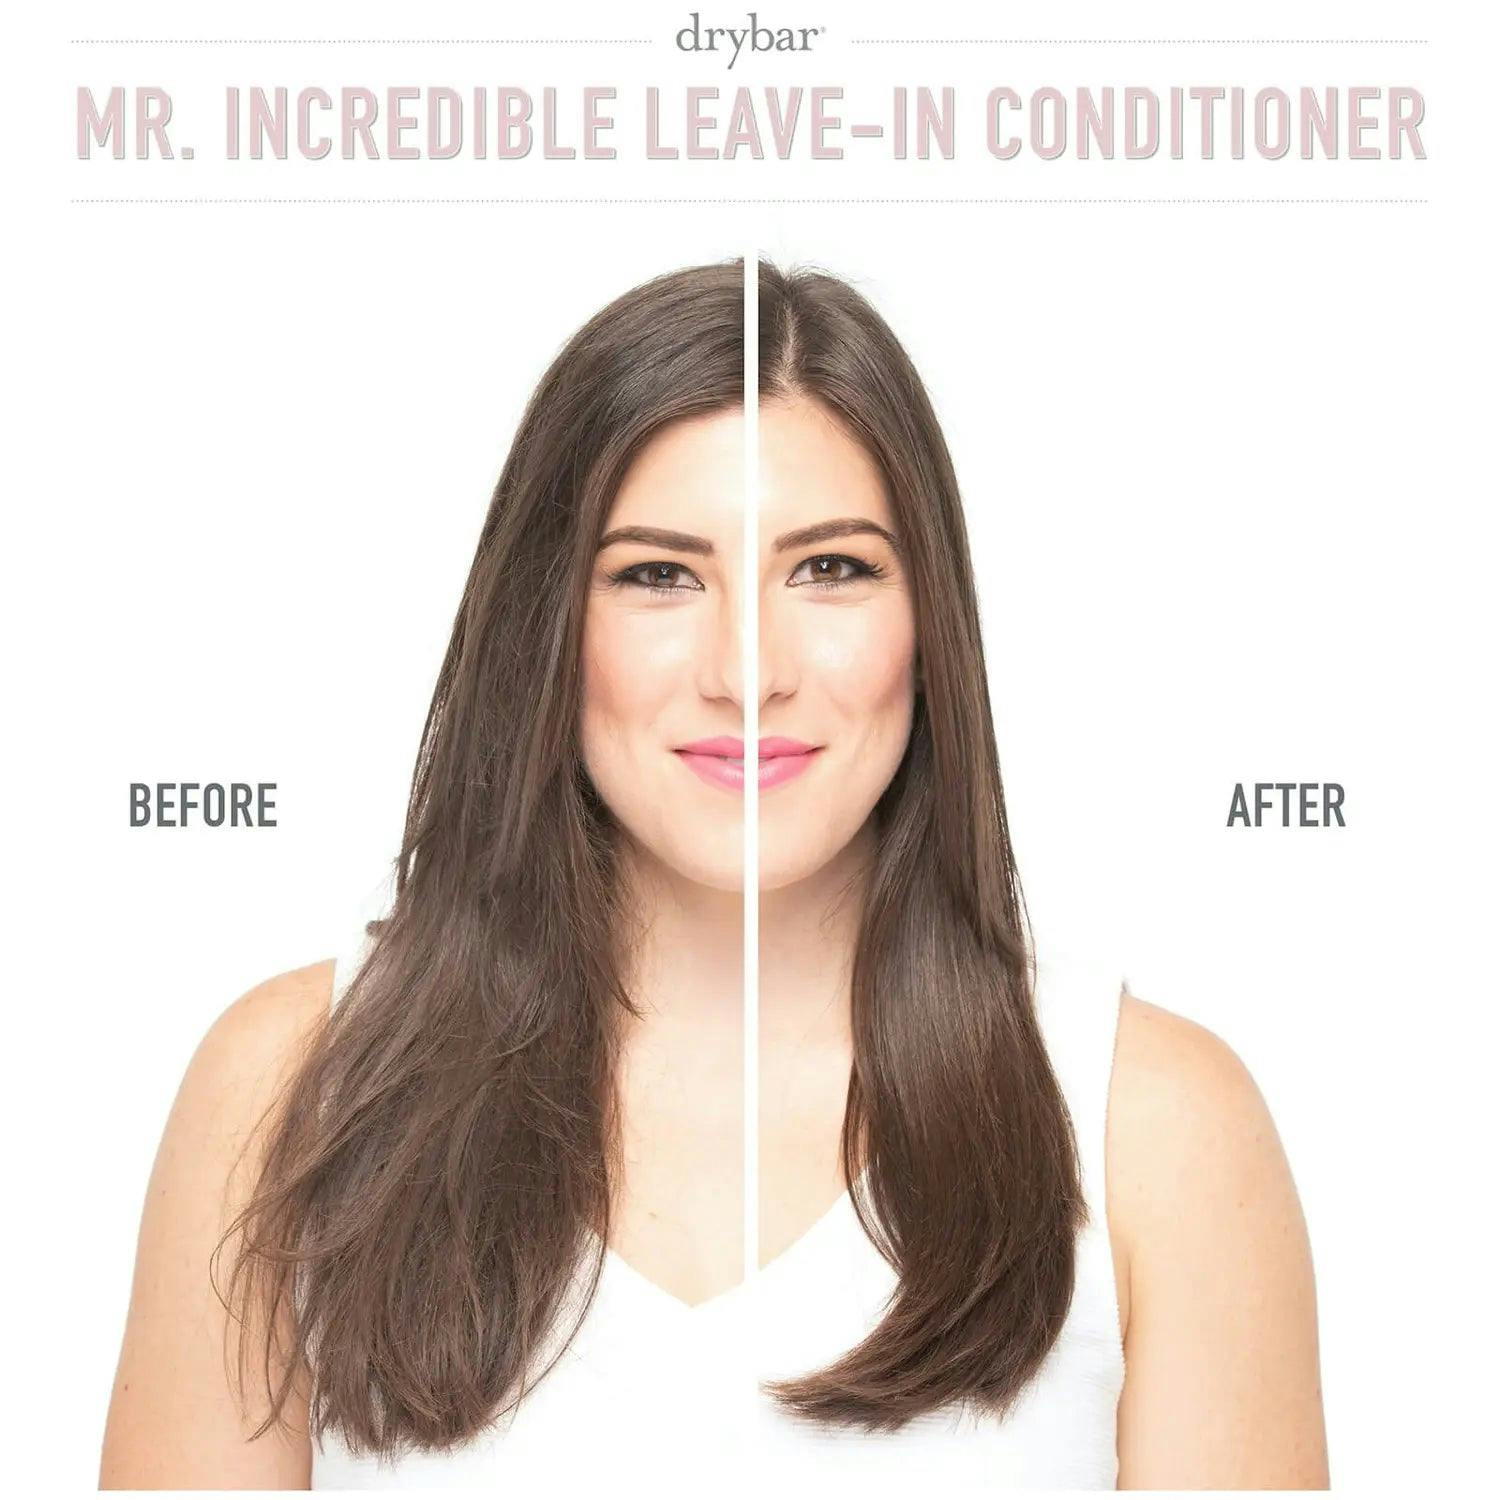 Drybar Mr. Incredible The Ultimate Leave-In Conditioner 150g